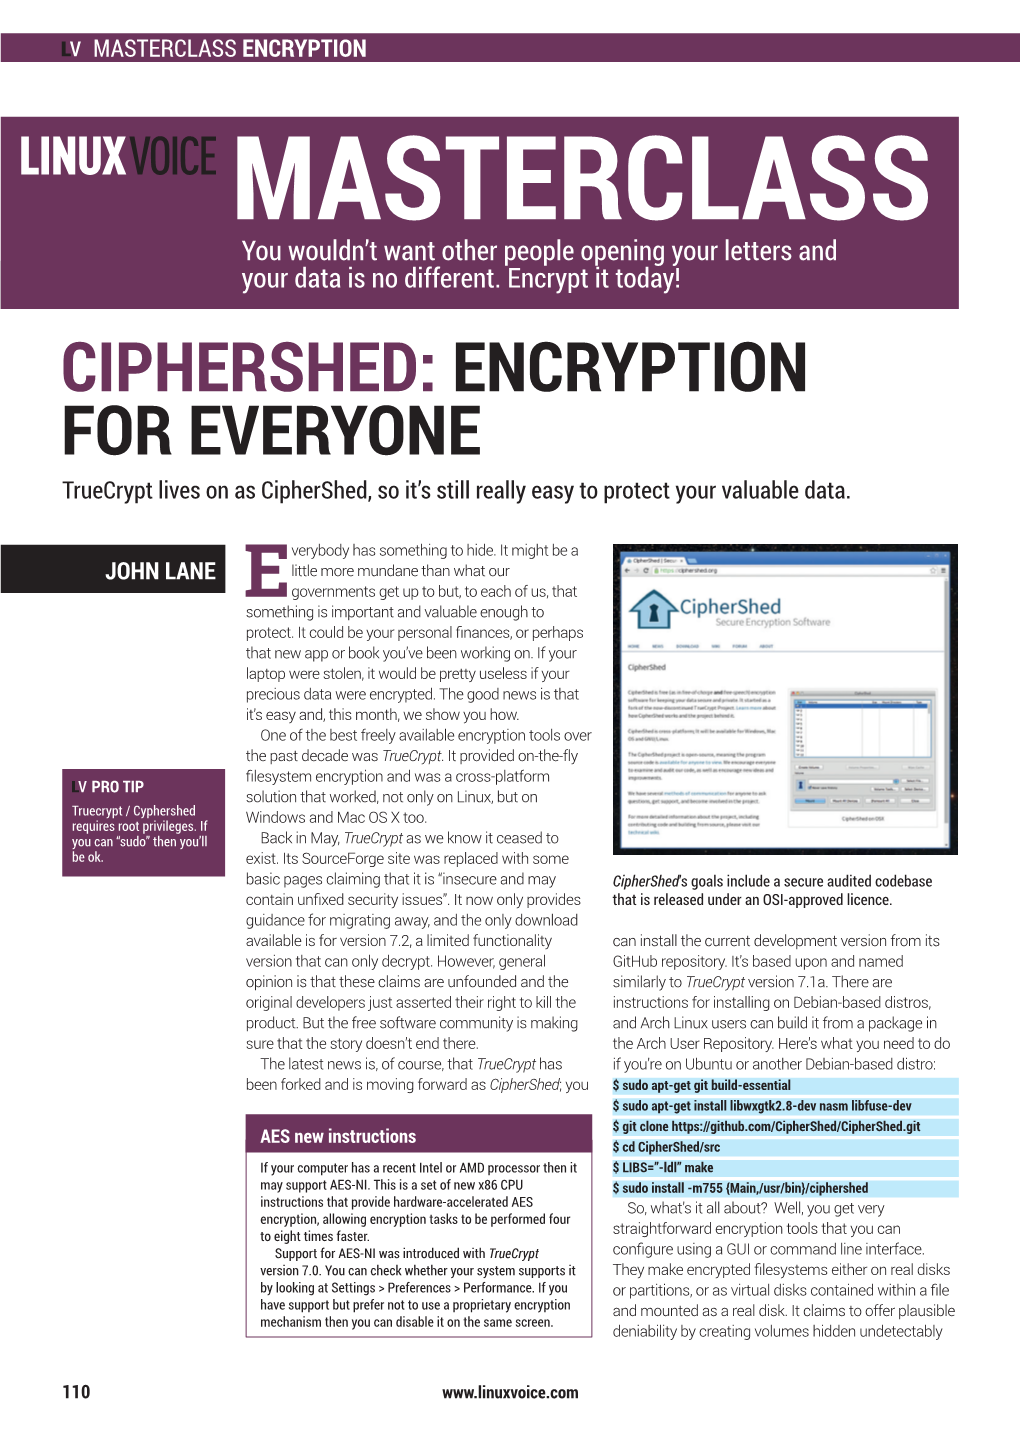 MASTERCLASS ENCRYPTION MASTERCLASS You Wouldn’T Want Other People Opening Your Letters and BEN EVERARD Your Data Is No Different